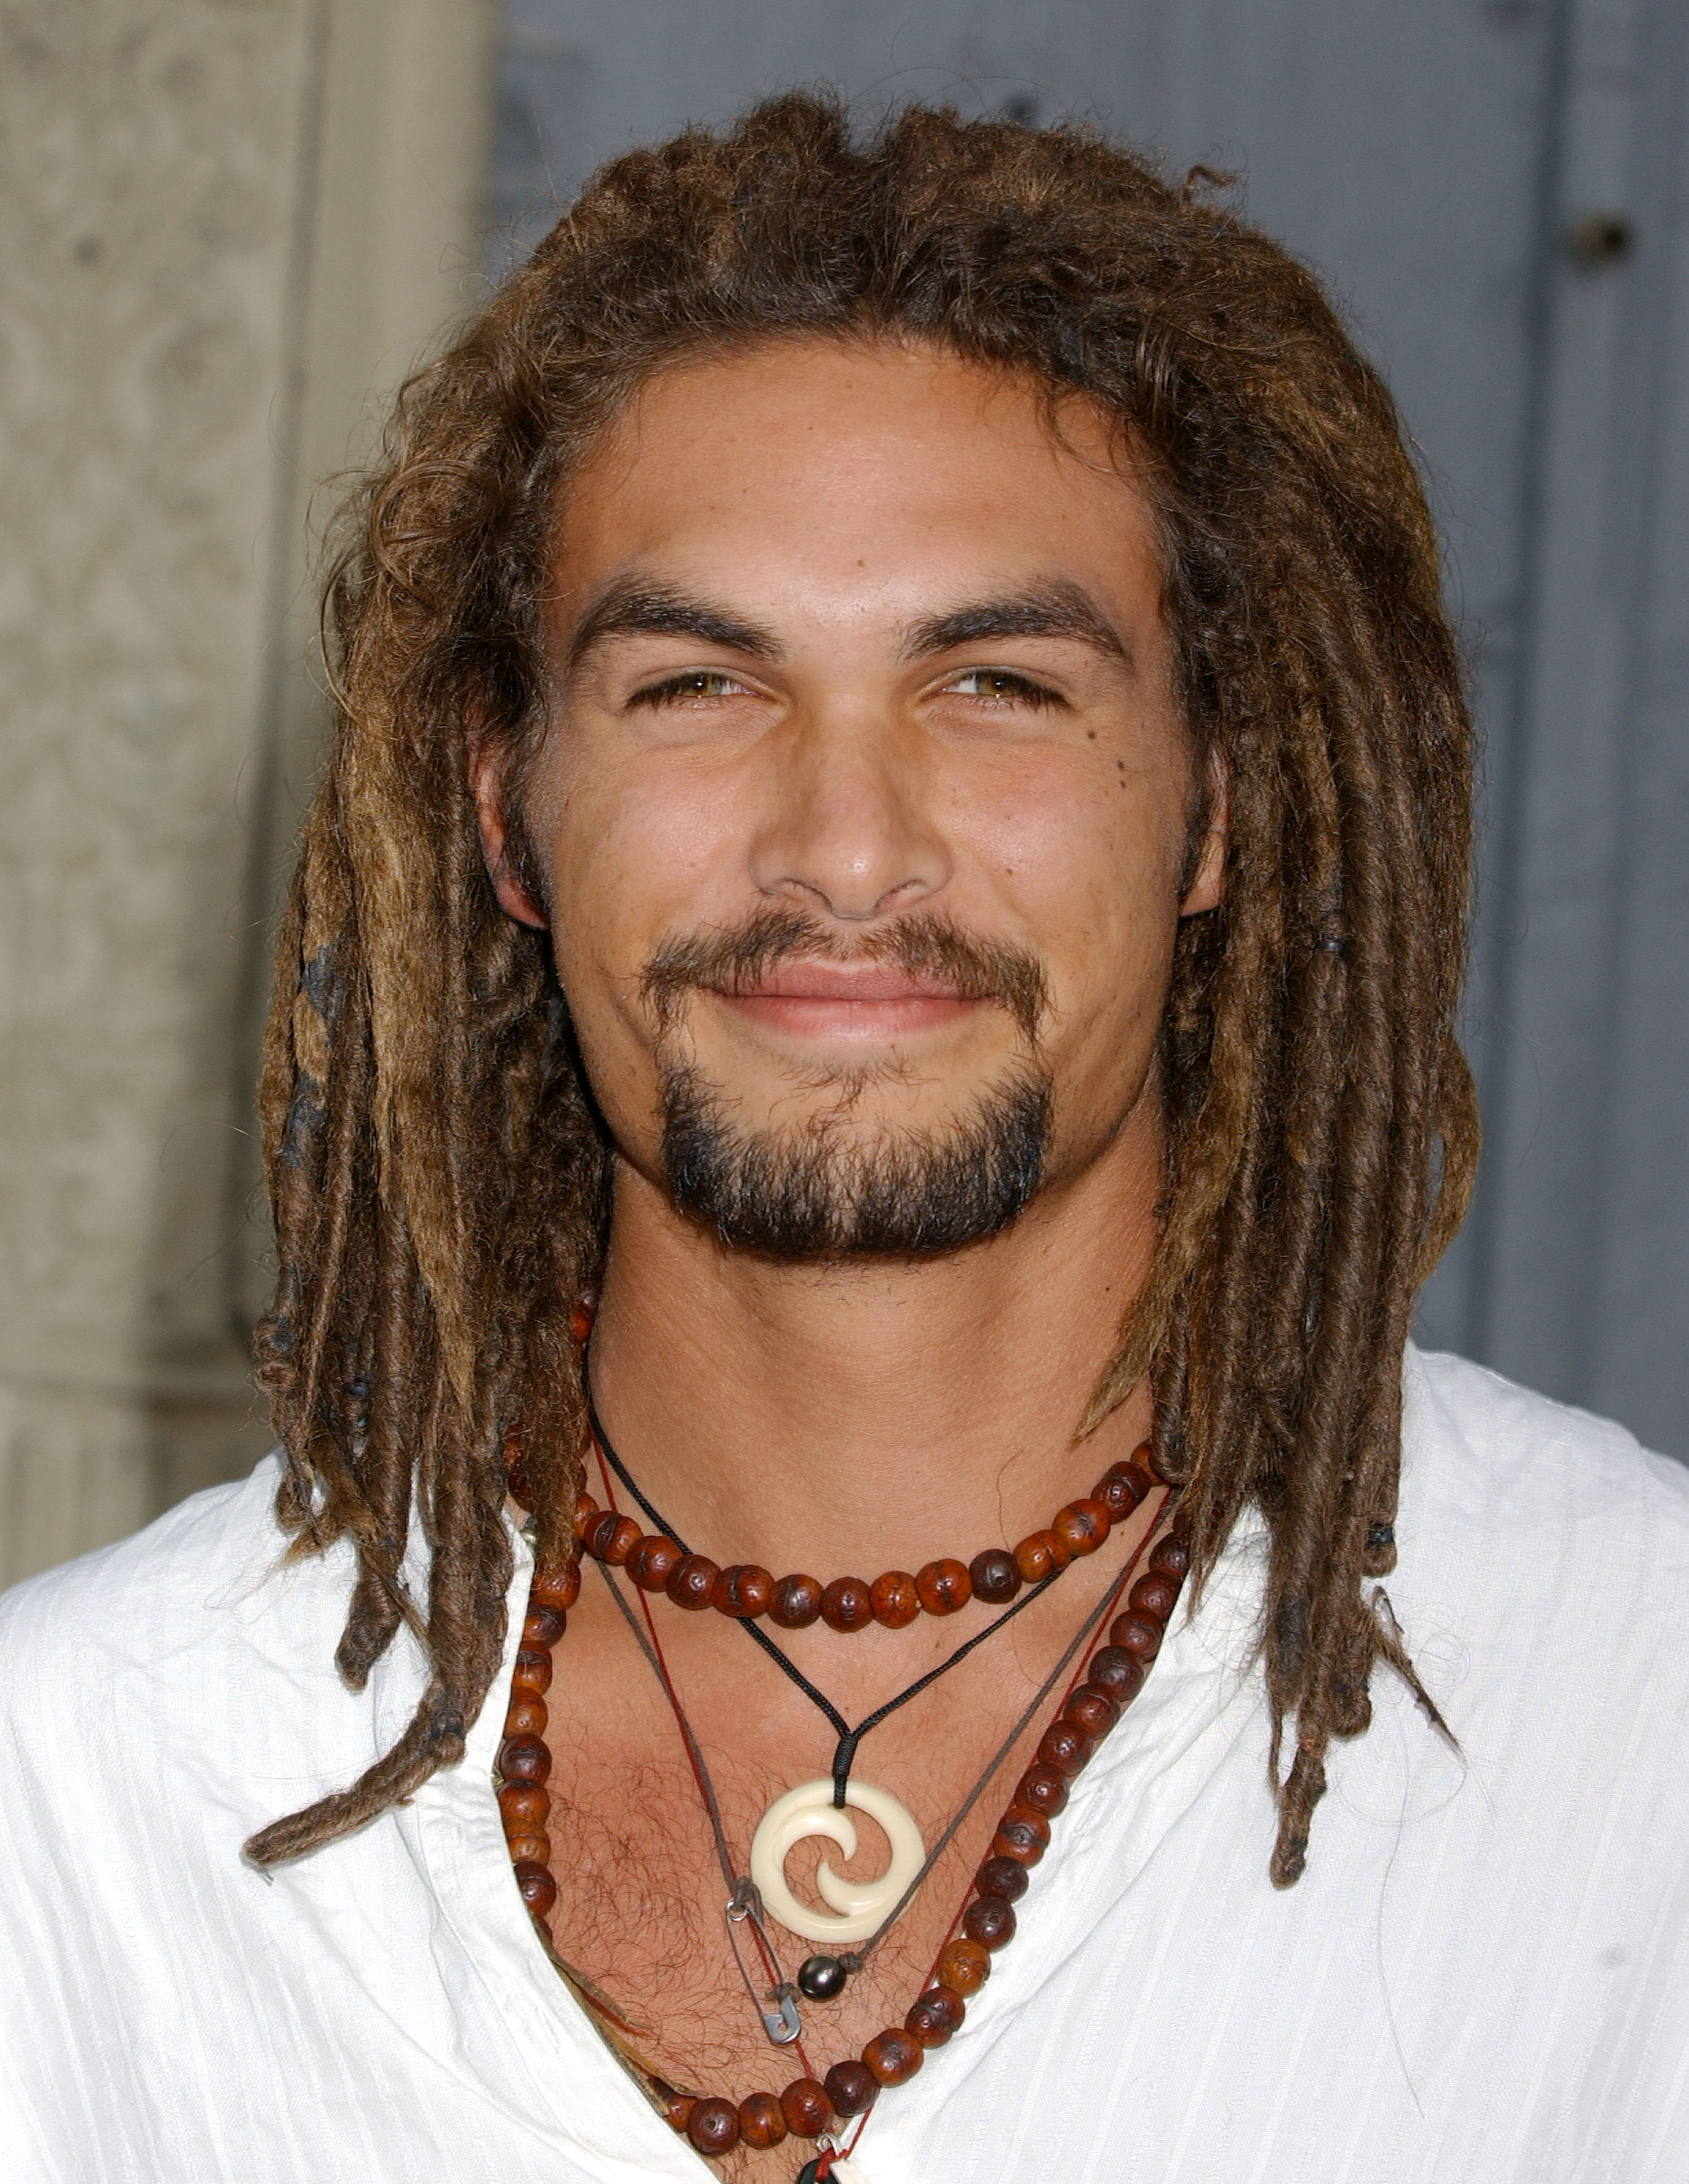 Jason Momoa attends the Fox all-star party | Source: Getty Images